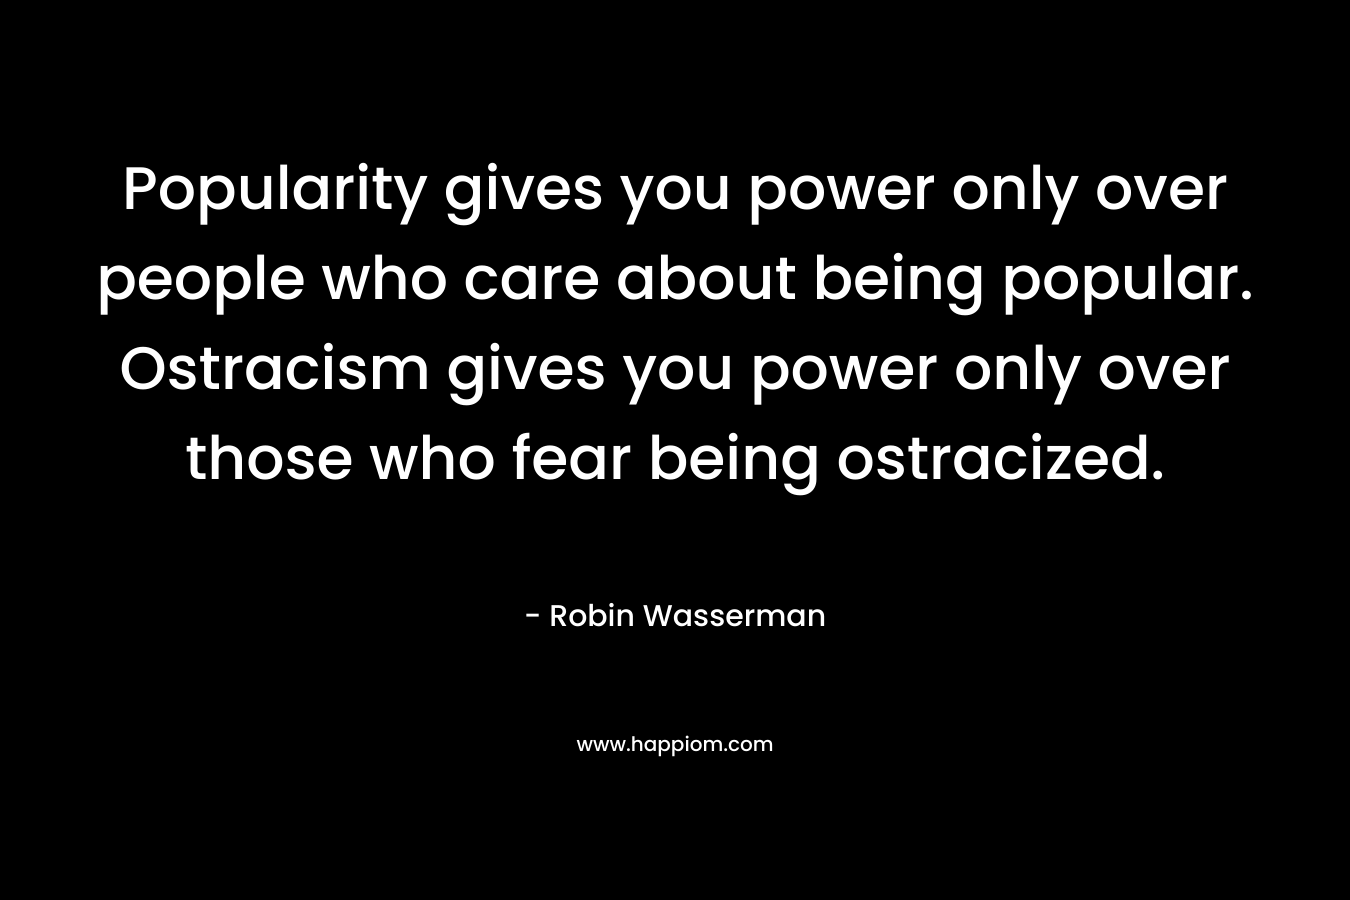 Popularity gives you power only over people who care about being popular. Ostracism gives you power only over those who fear being ostracized.